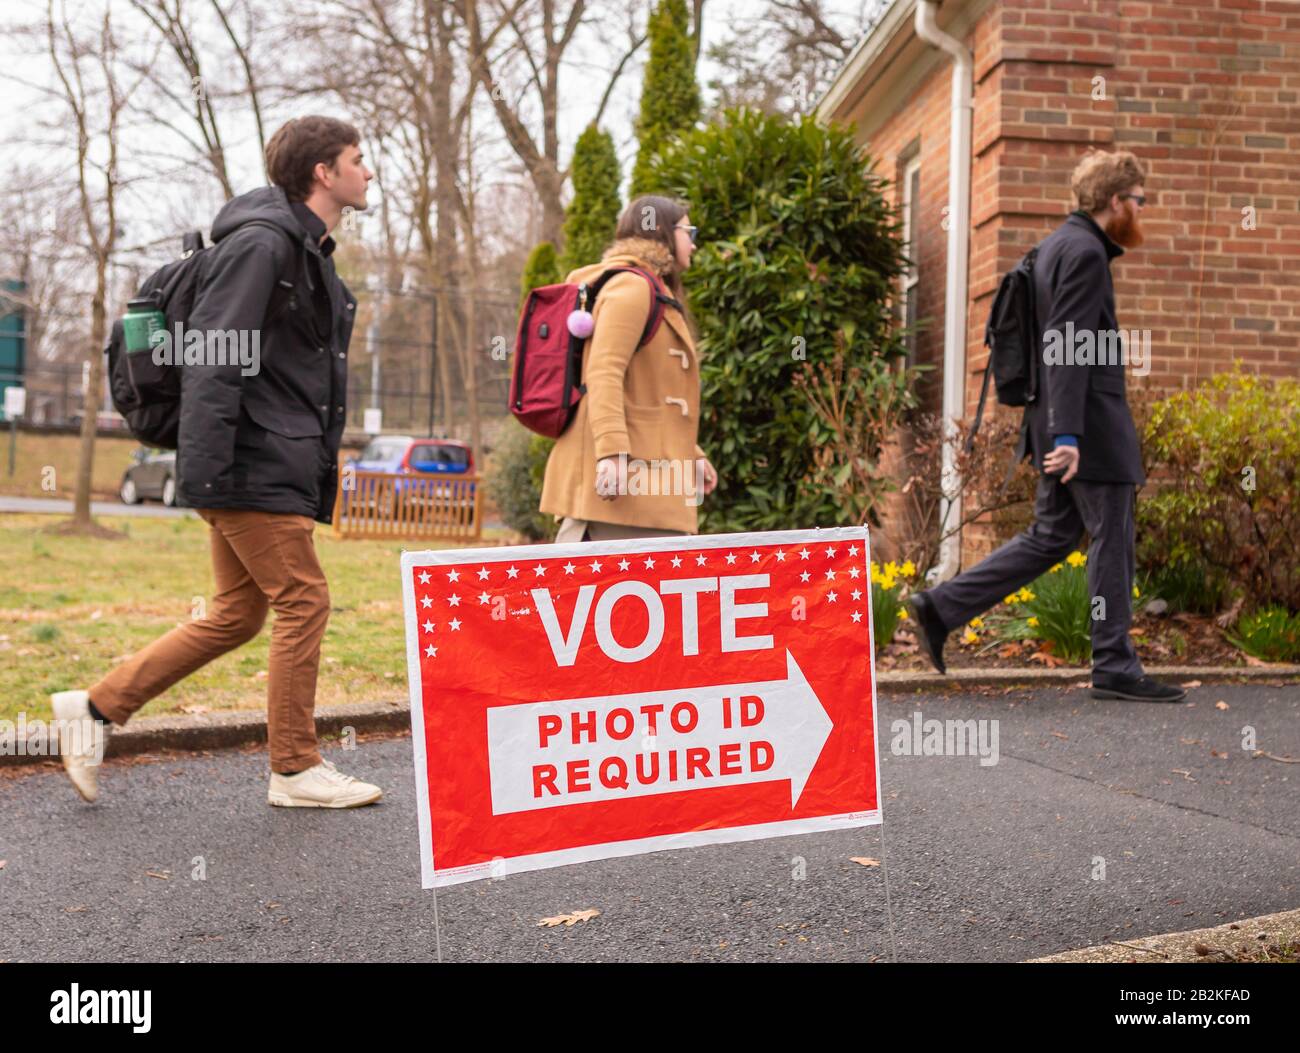 ARLINGTON, VIRGINIA, USA - MARCH 3, 2020: Democratic primary election voters arrive Lyon Village polling place. Photo ID sign. Stock Photo